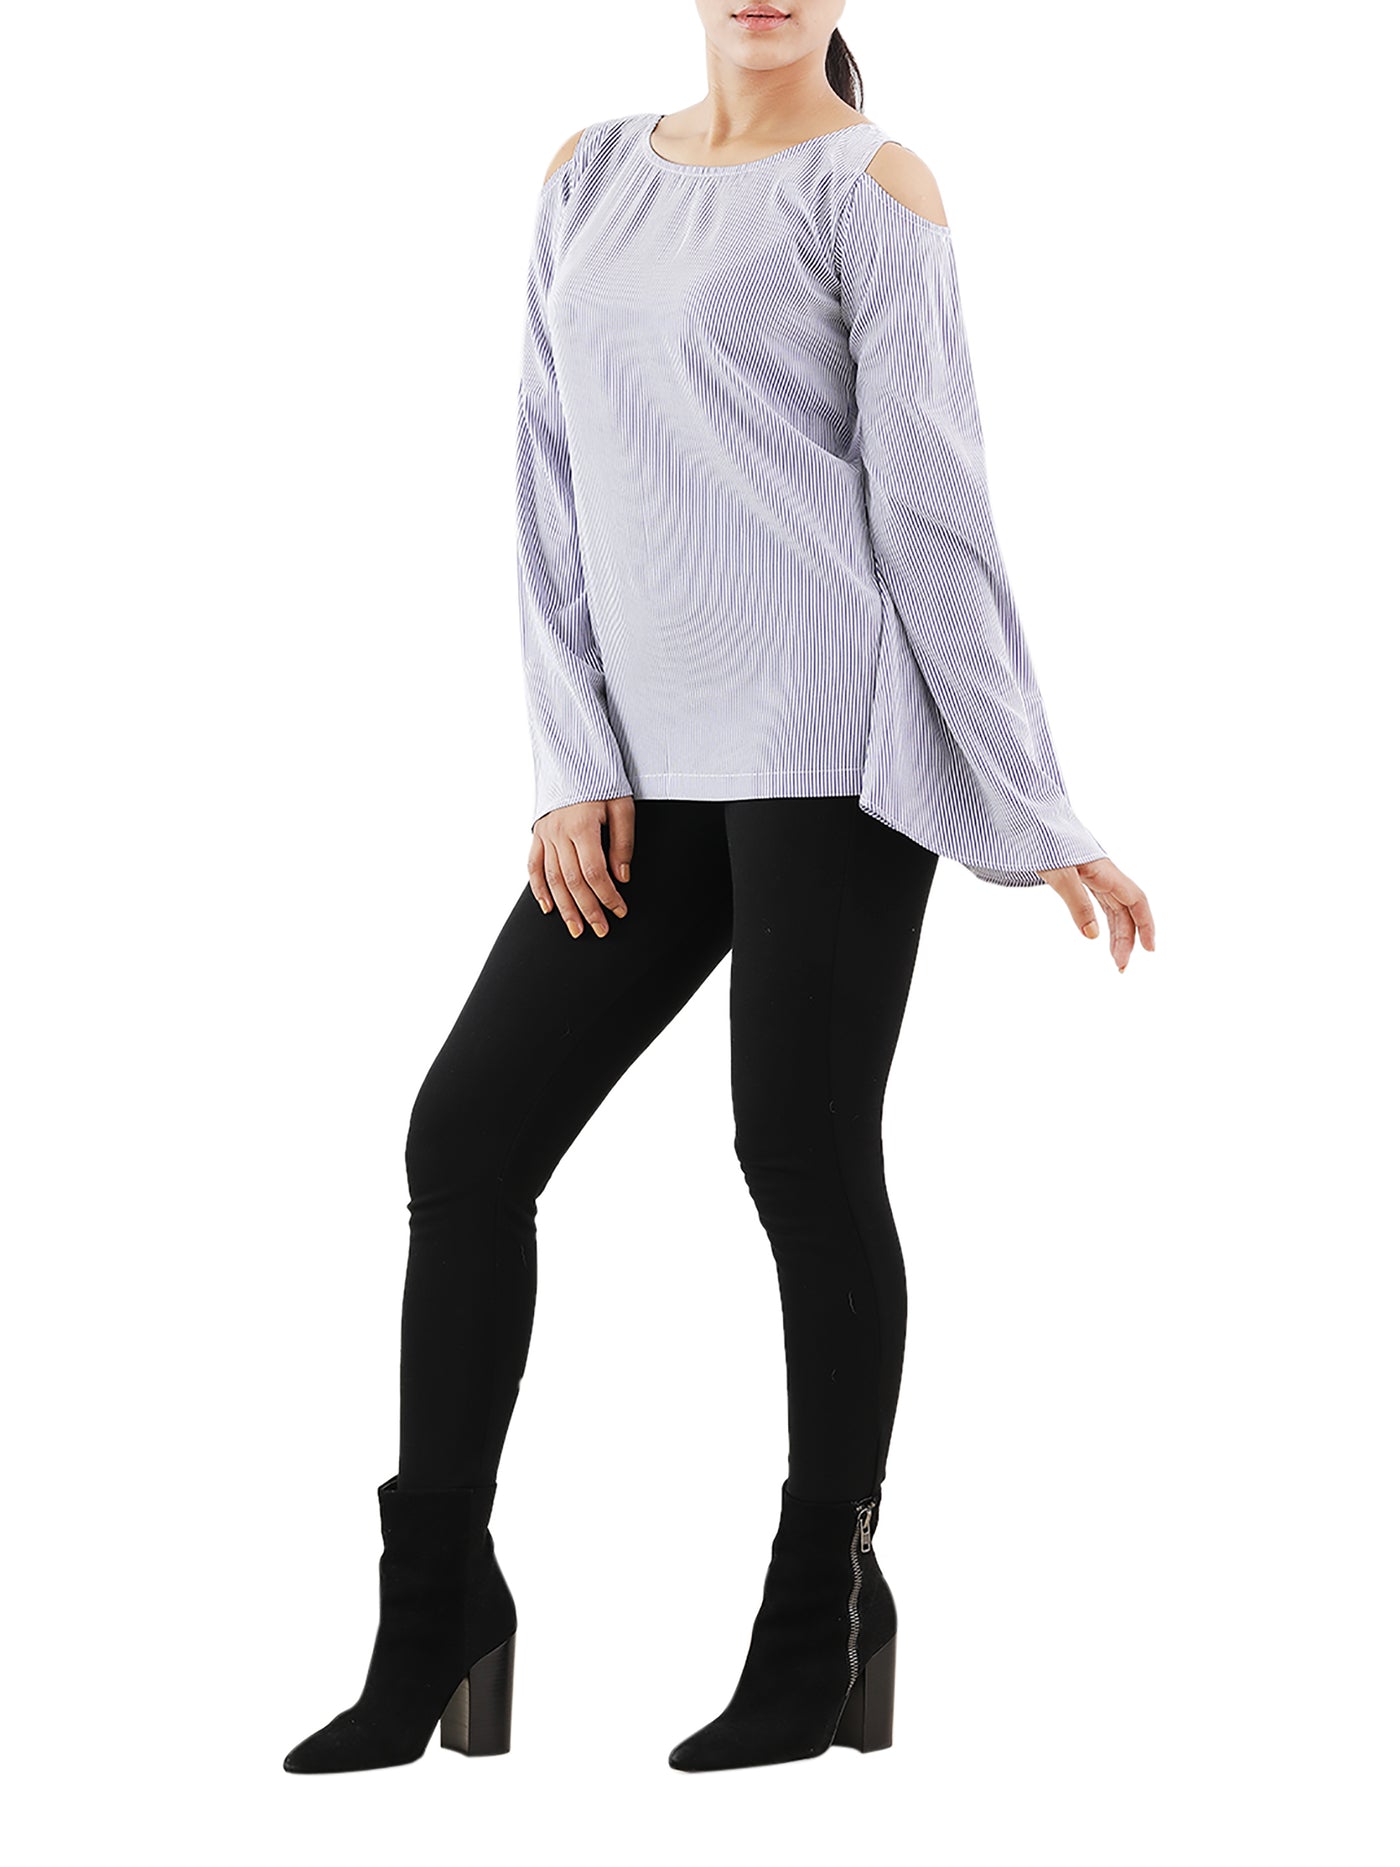 Striped Allure: Full Sleeve Top with Sleeve Keyhole Design